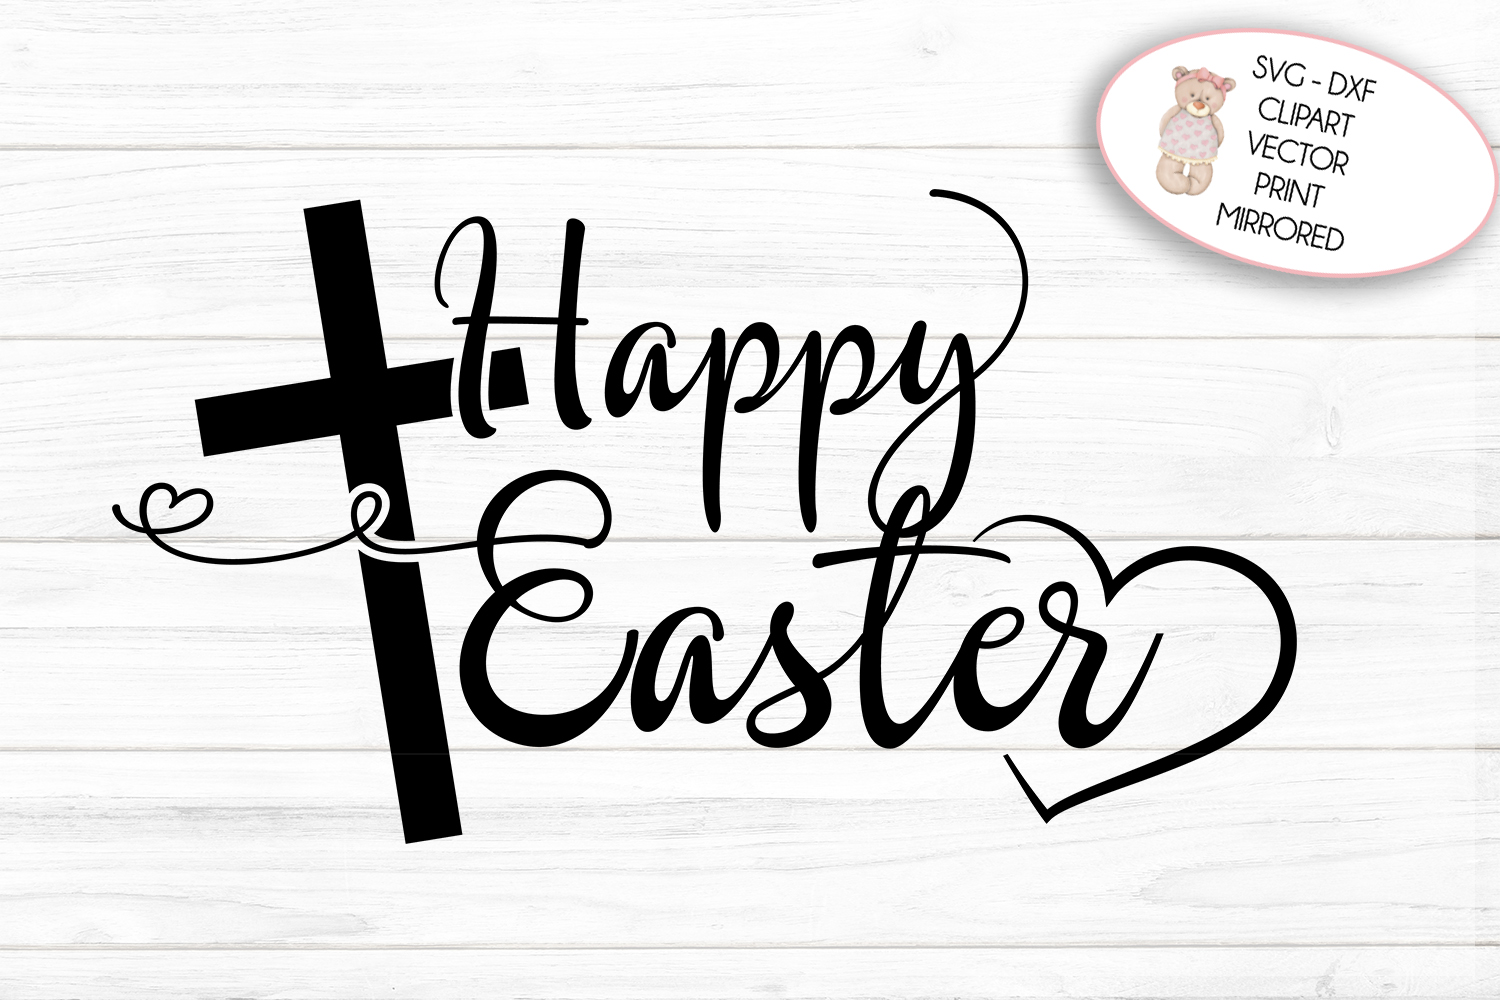 Happy Easter with Cross | svg cut file, clipart, print ...